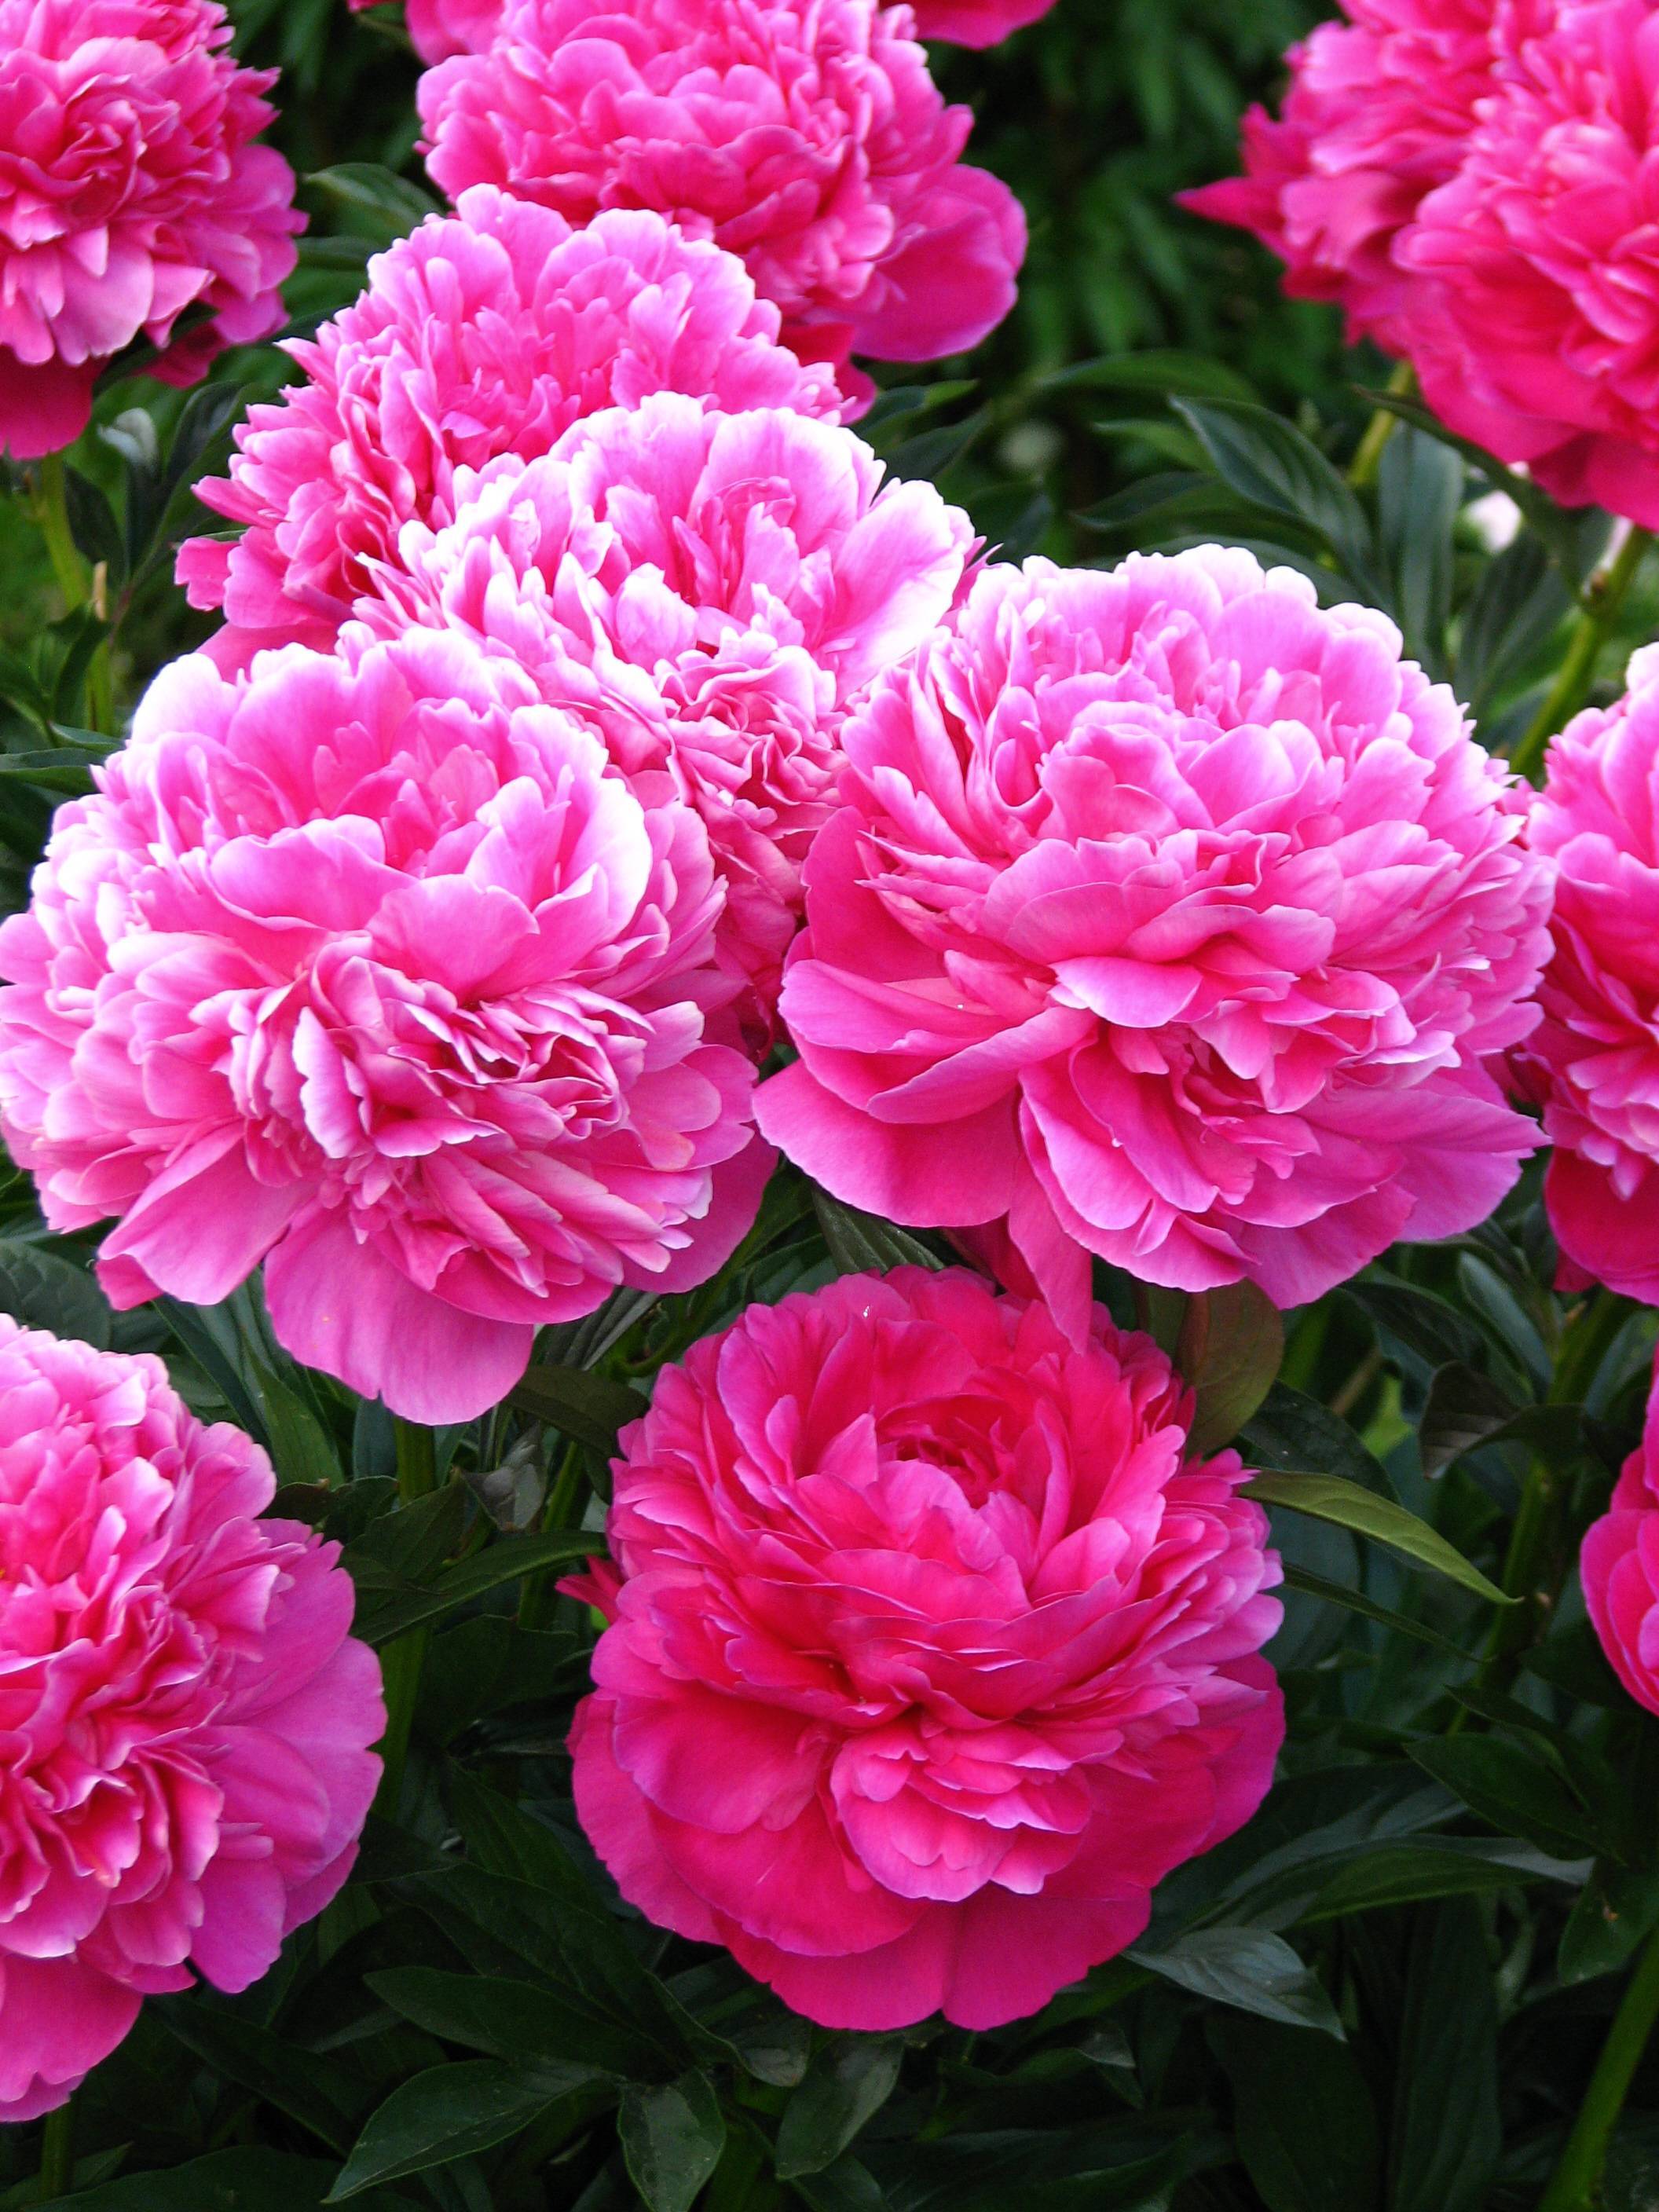 shiny, pink, ruffled, rose-like flowers with multiple layers, and dark-green, glossy leaves